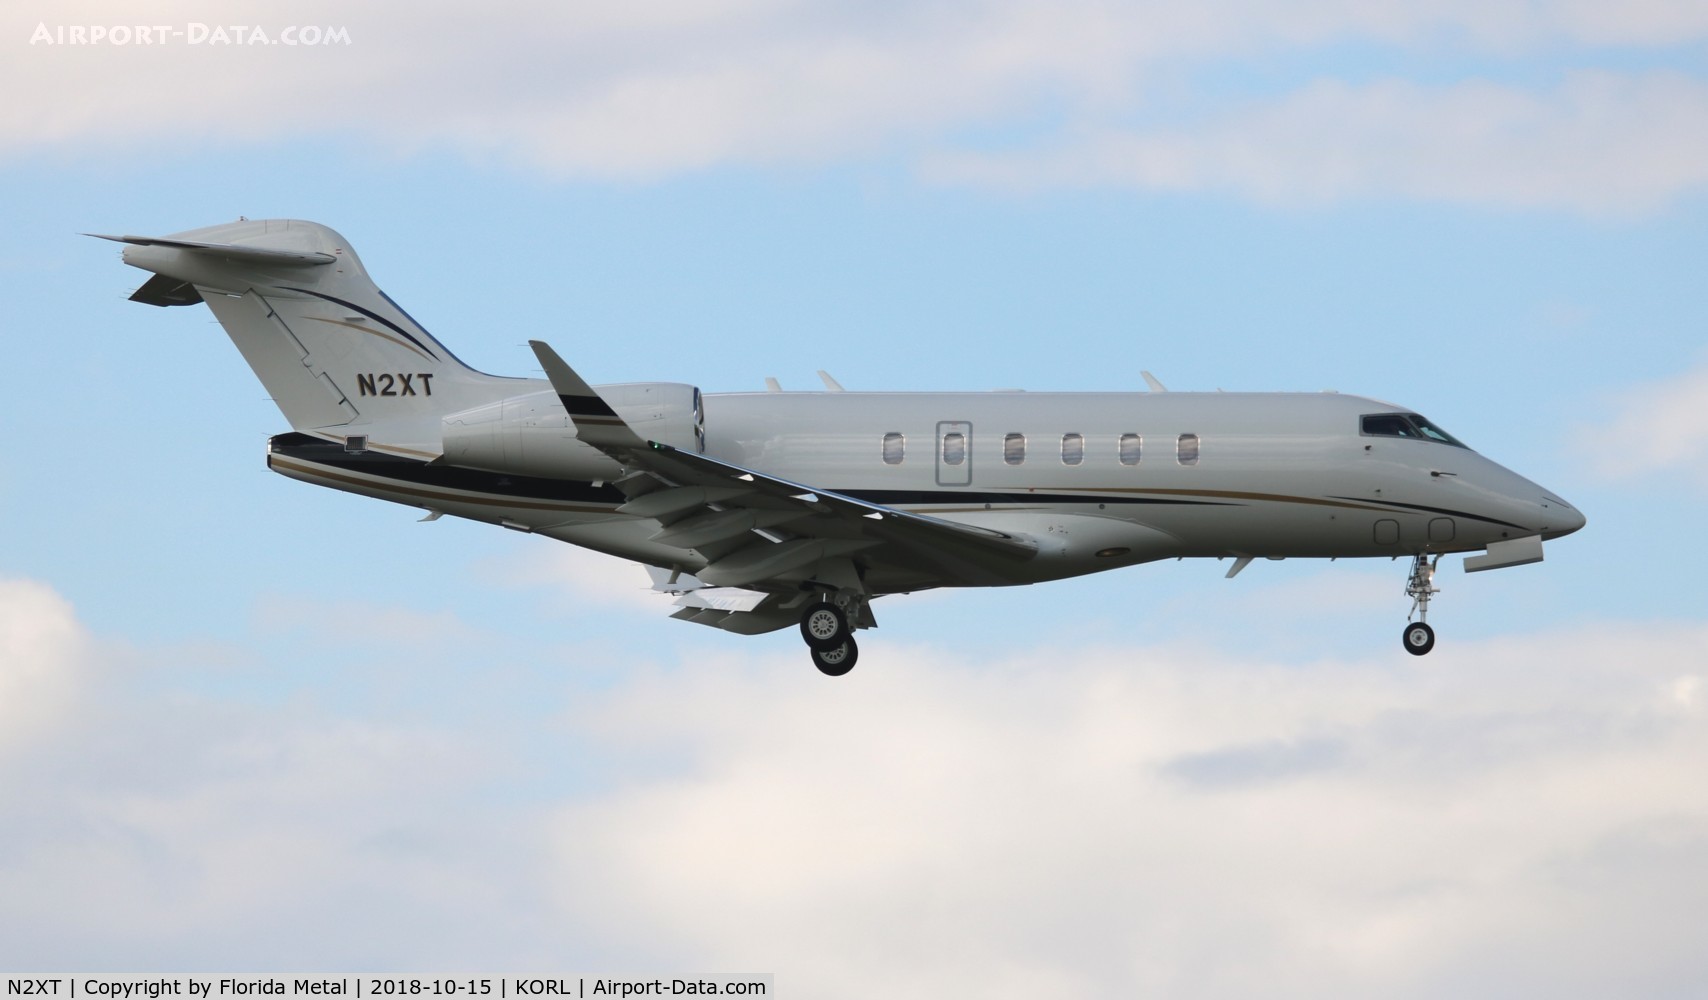 N2XT, 2015 Bombardier Challenger 350 (BD-100-1A10) C/N 20589, Challenger 350 zx